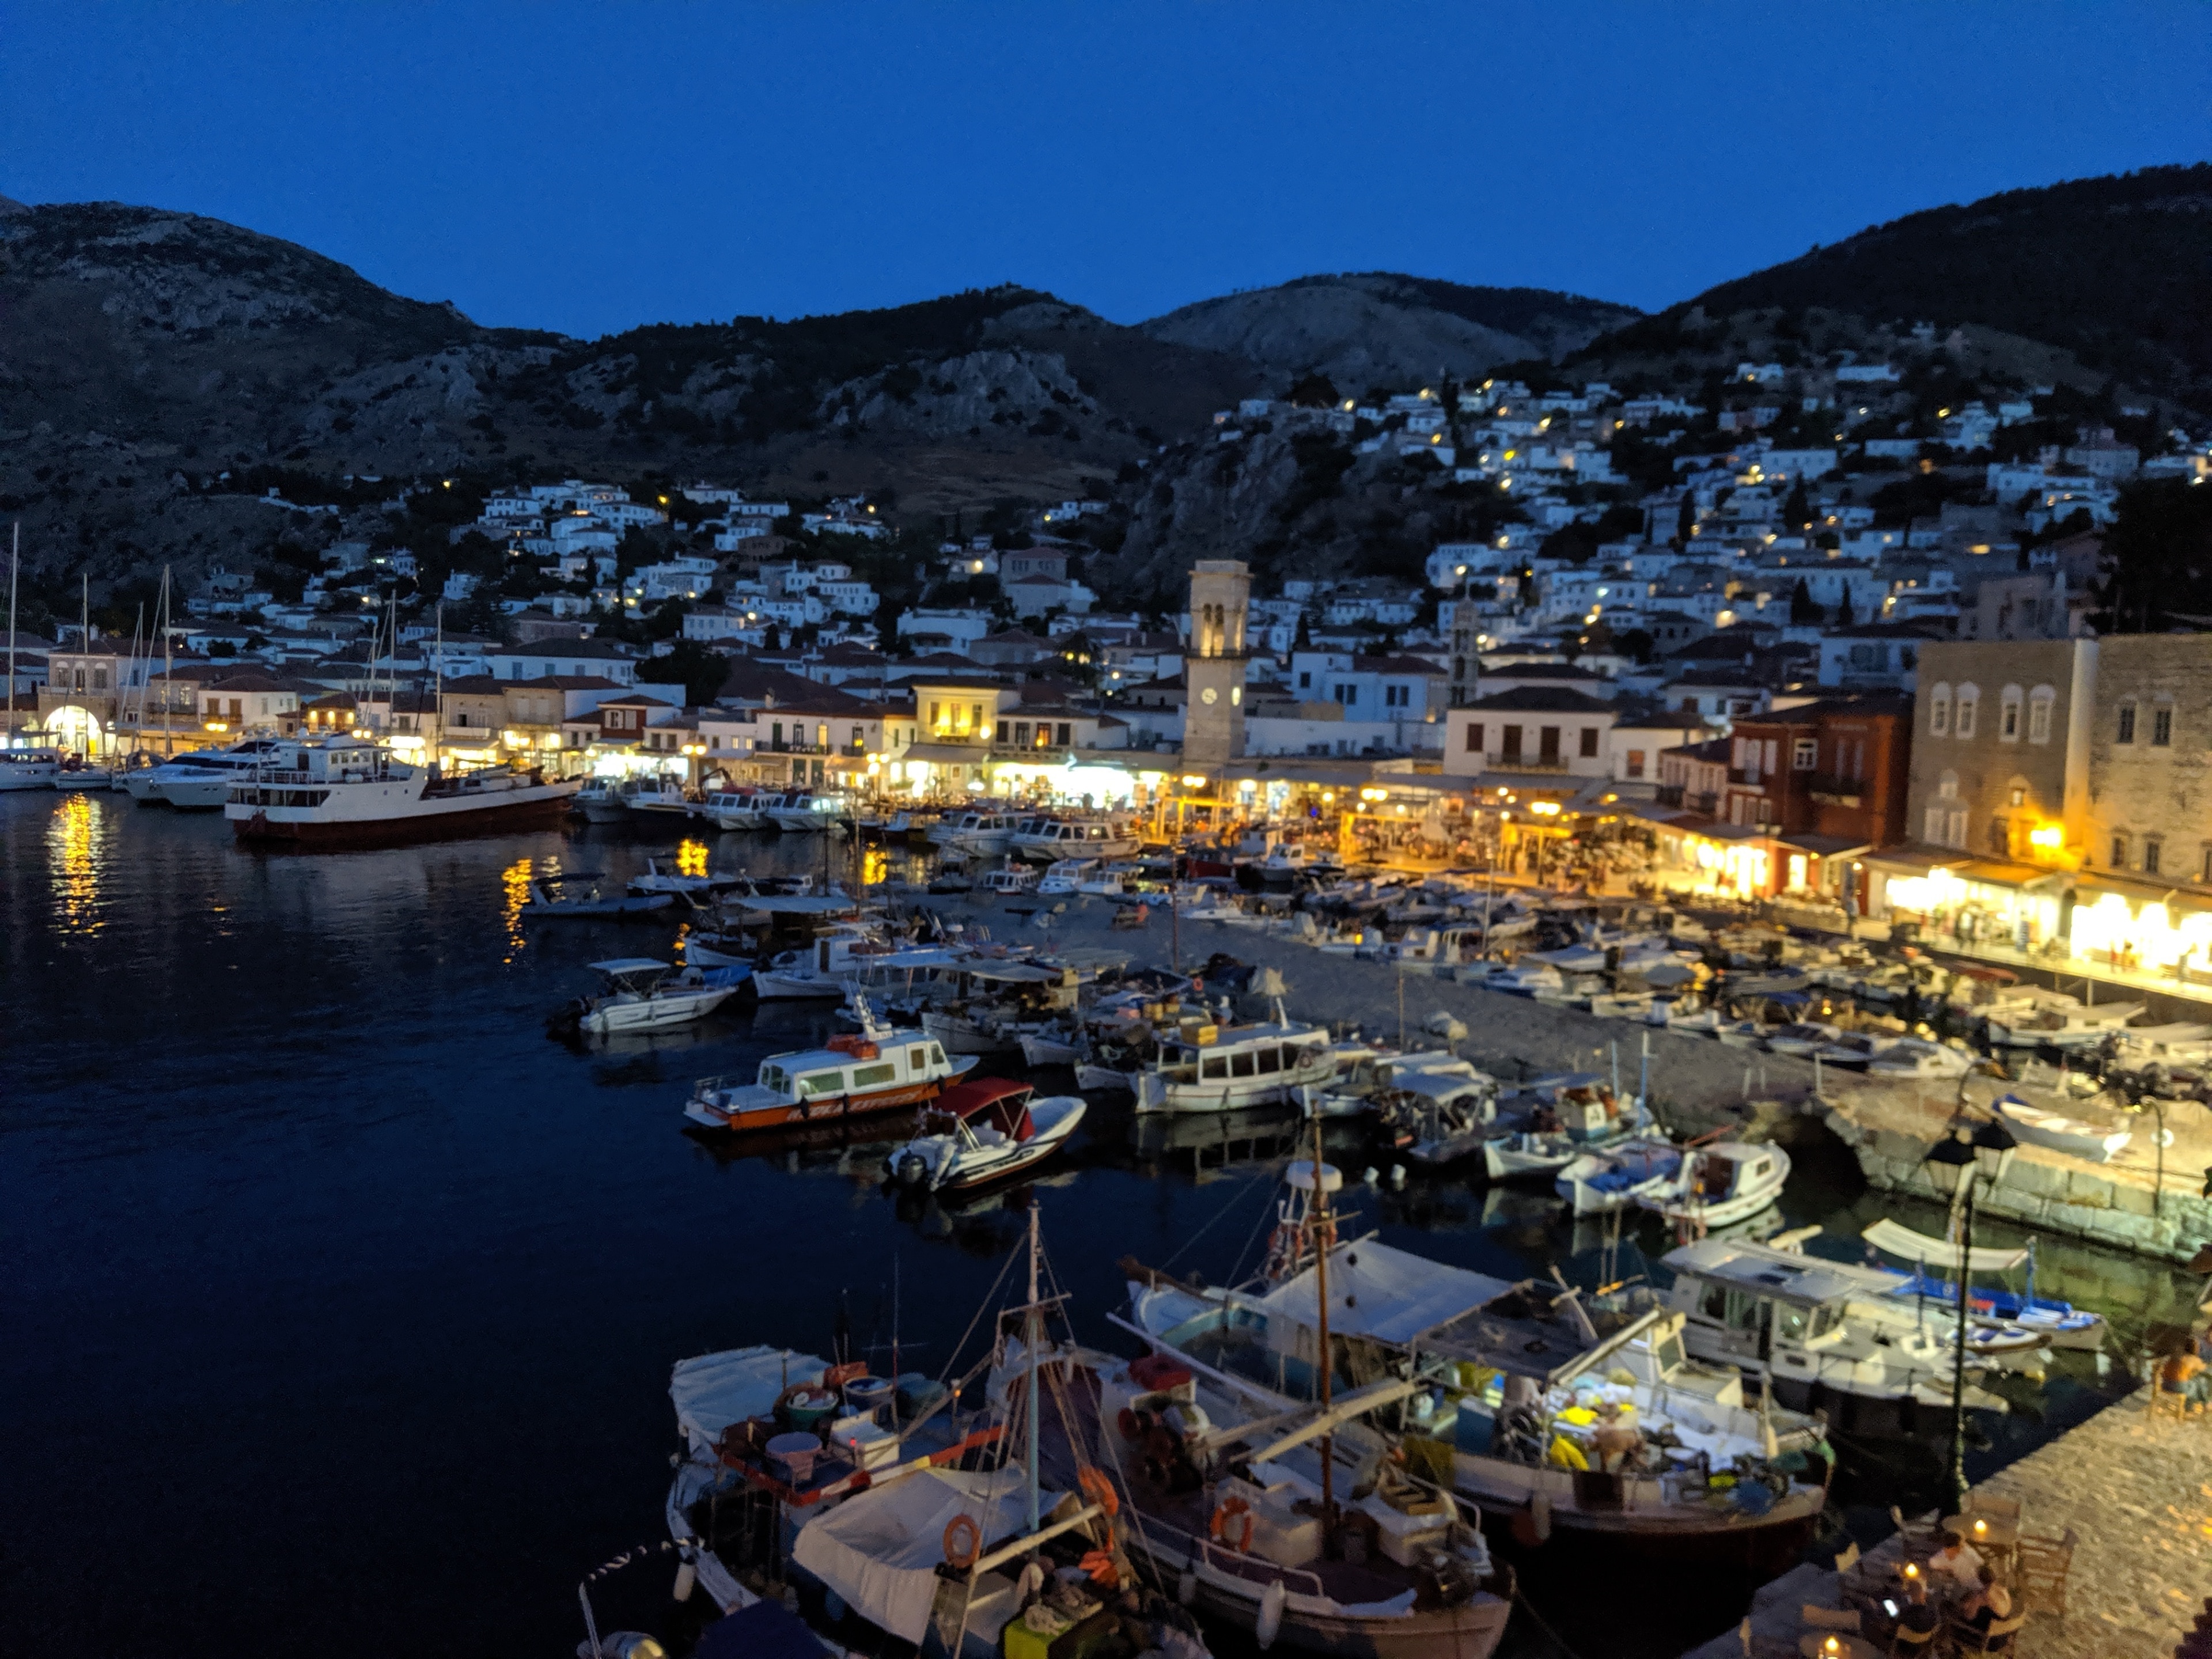 Hydra Port at night, taken from the terrace of the fabulous Hydrea Hotel. Hydra is a UNESCO heritage site and all the buildings are traditional with no modern architecture. Cars, motorcycles and bikes are not allowed on the island and public transport is quite literally by donkey or mule
#LifeAtExpedia